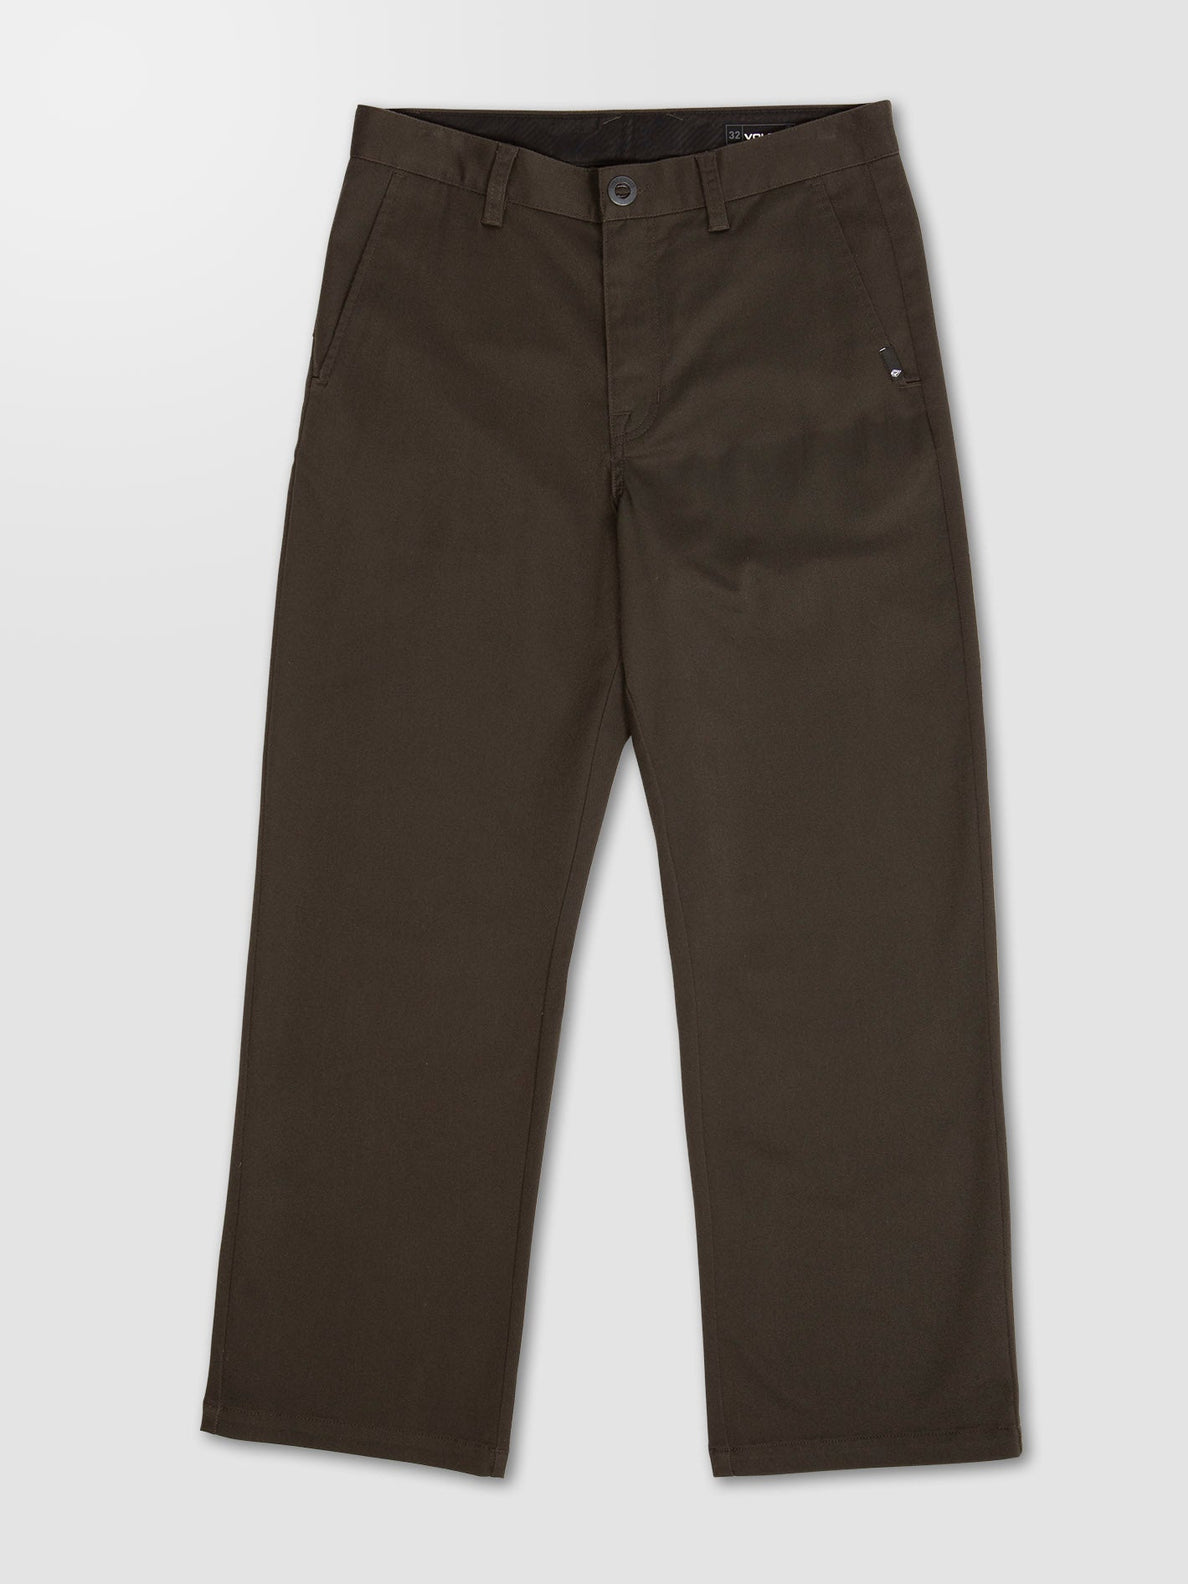 Loose Truck Chino Trousers - RINSED BLACK (A1112202_RIB) [6]